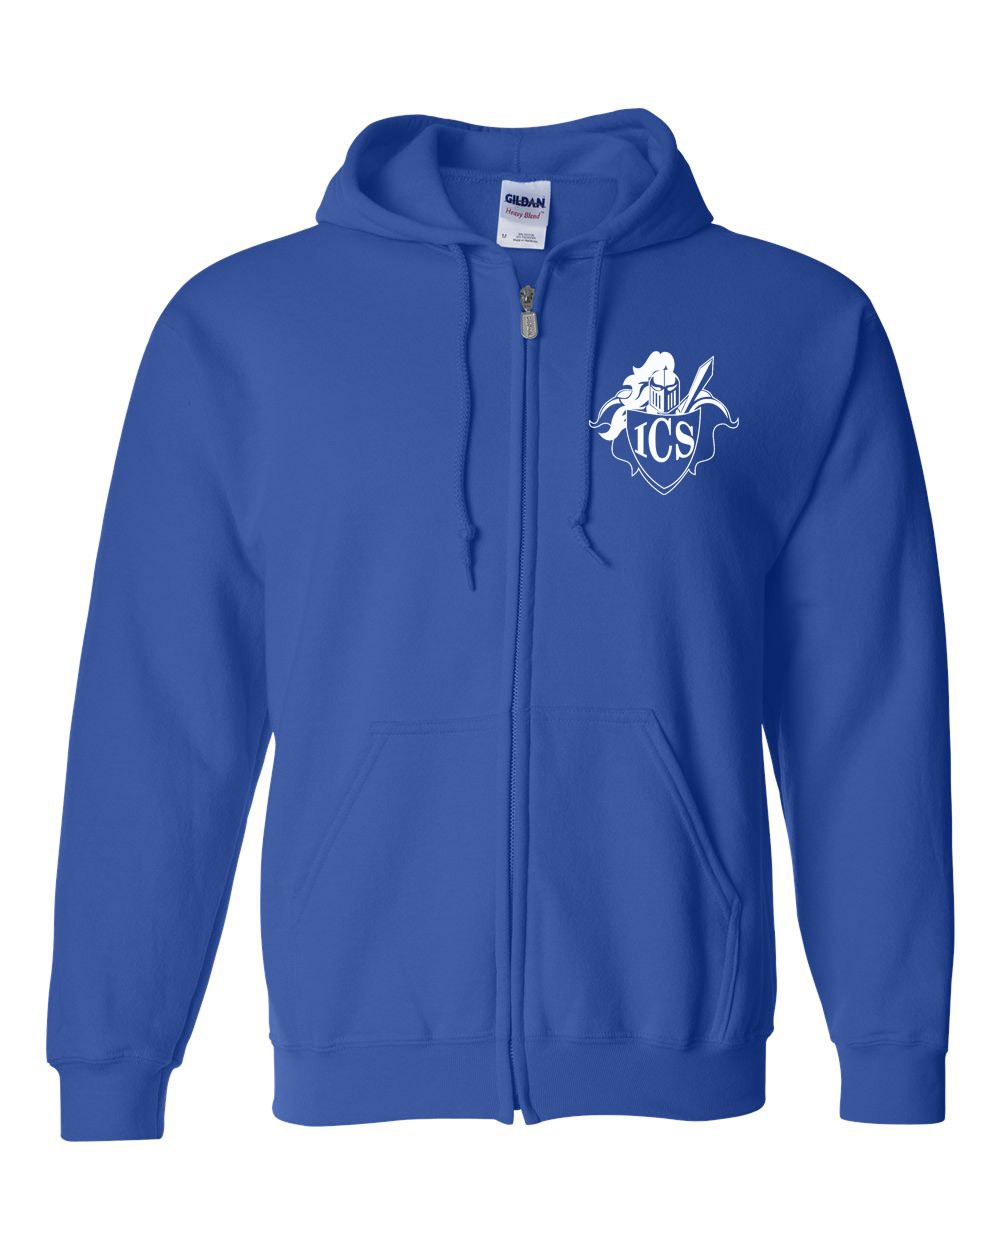 ICS Spirit Zipper Hoodie w/ White Logo - Please allow 2-3 Weeks for Delivery